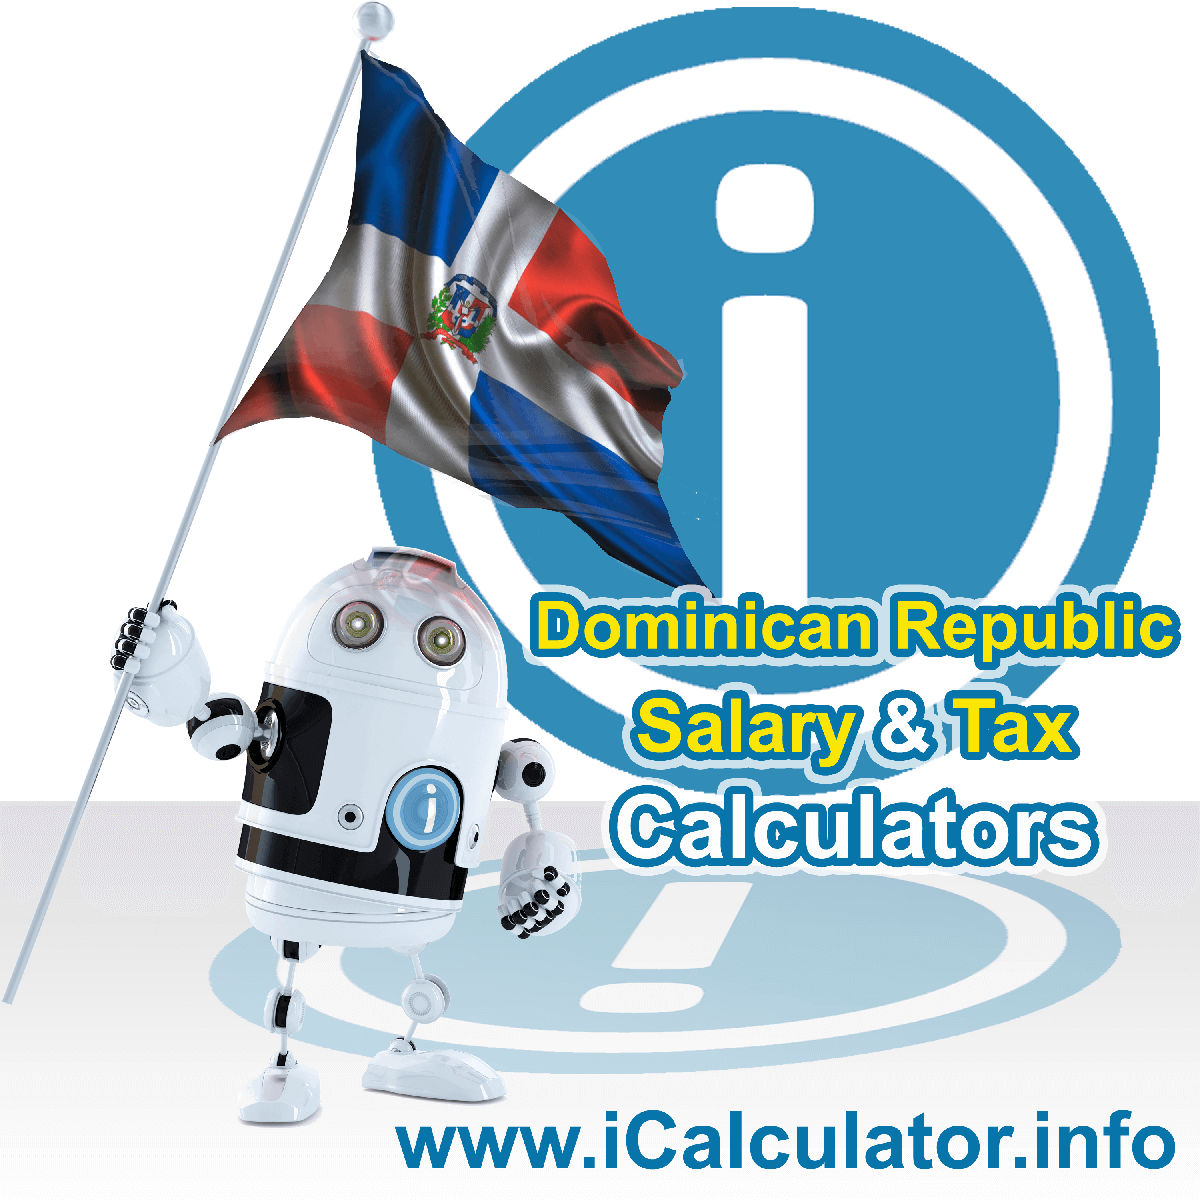 Dominican Republic Salary Calculator. This image shows the Dominican Republicese flag and information relating to the tax formula for the Dominican Republic Tax Calculator